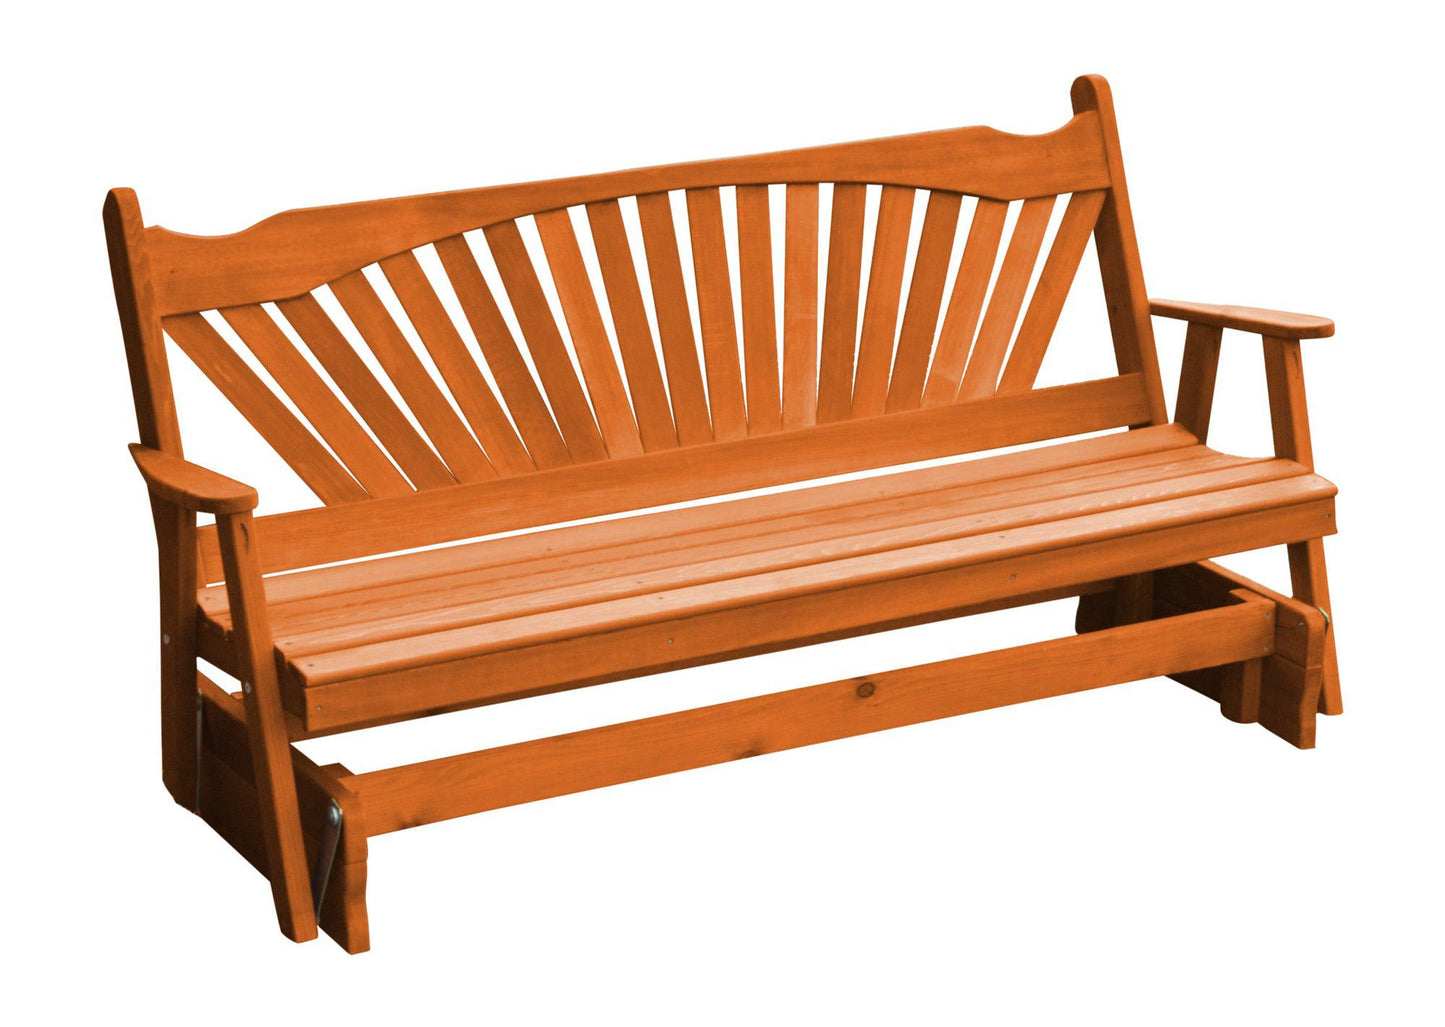 A&L FURNITURE CO. Western Red Cedar 6' Fanback Glider - LEAD TIME TO SHIP 2 WEEKS